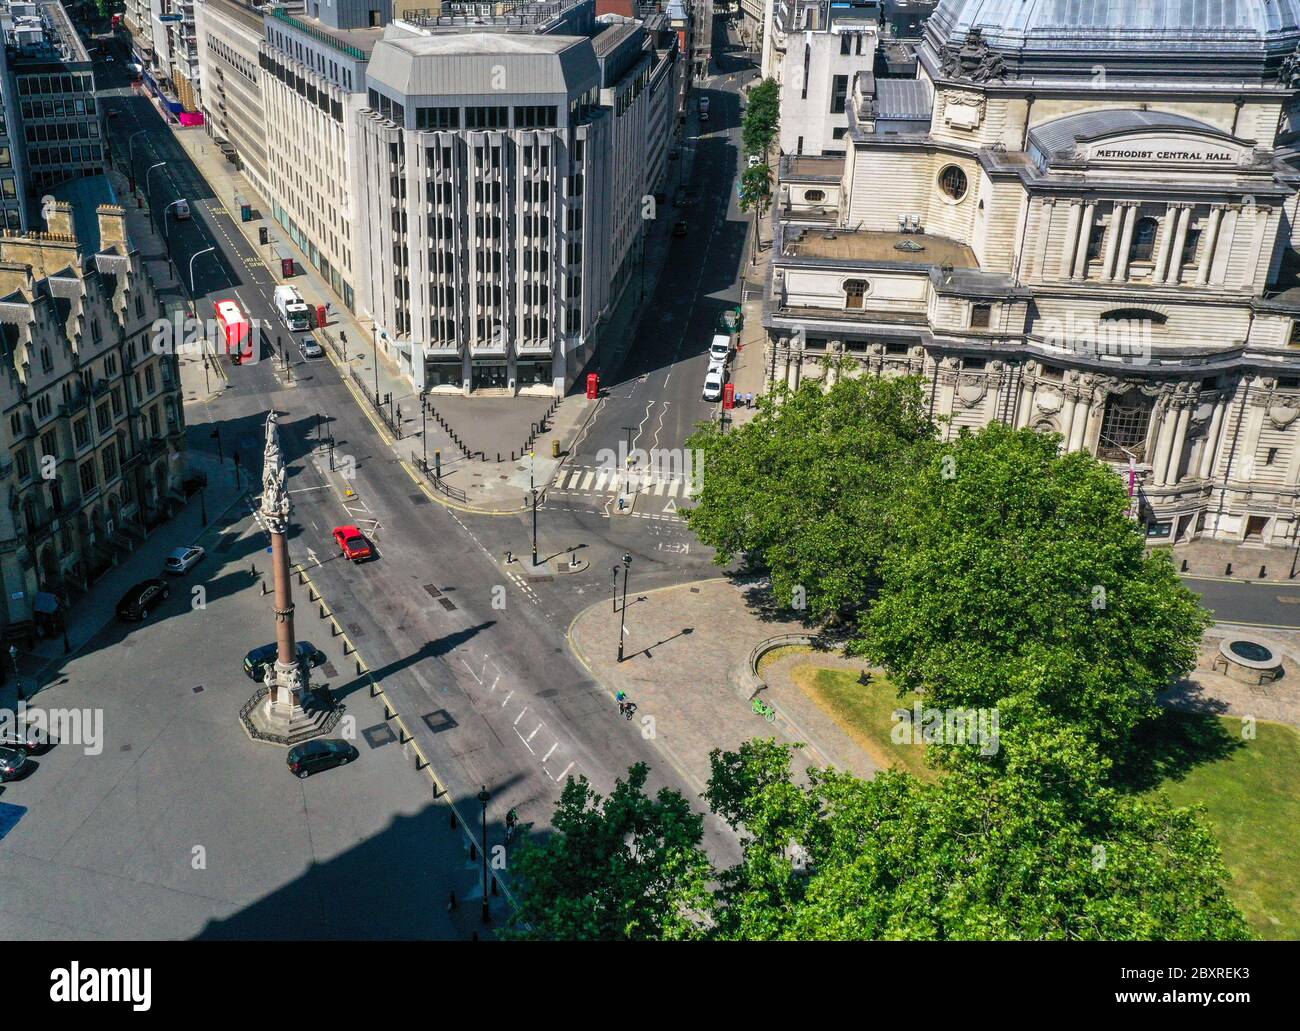 An aerial view of London, at the junction of Victoria Street and Tothill Street, showing the Crimea and Indian Mutiny memorial, the department for Education (top left), Barclays Bank (centre) and Methodist Central Hall on Storey's Gate (right). Stock Photo